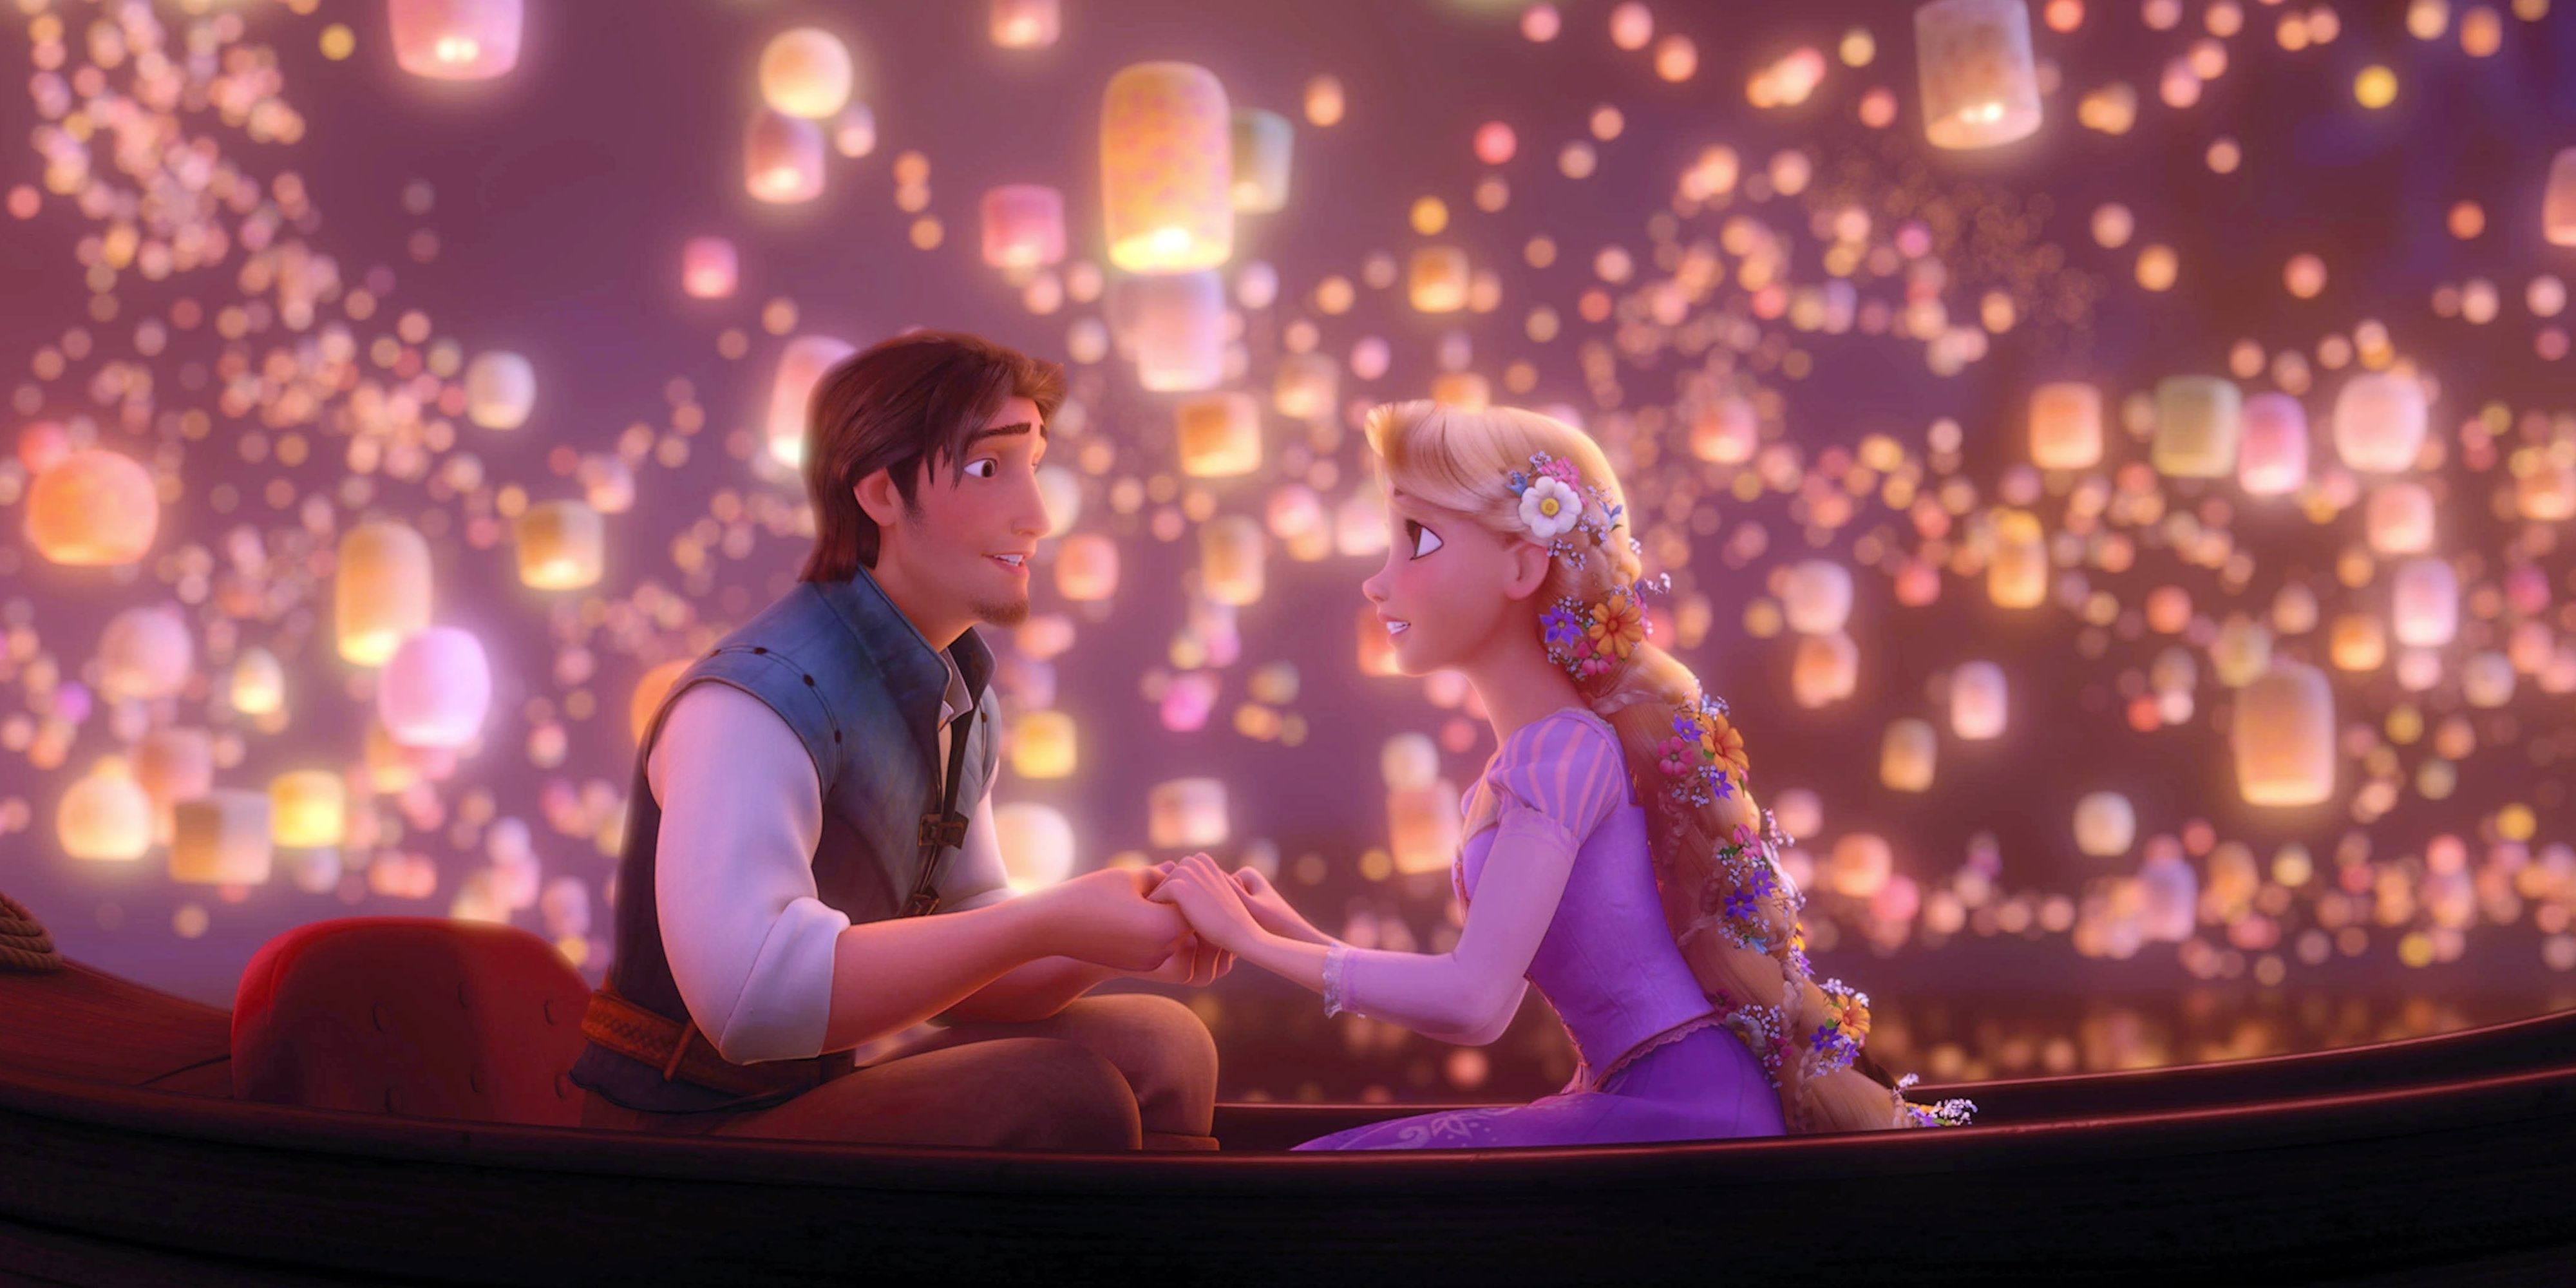 Flynn and Rapunzel on the boat with floating lanterns behind them in Tangled